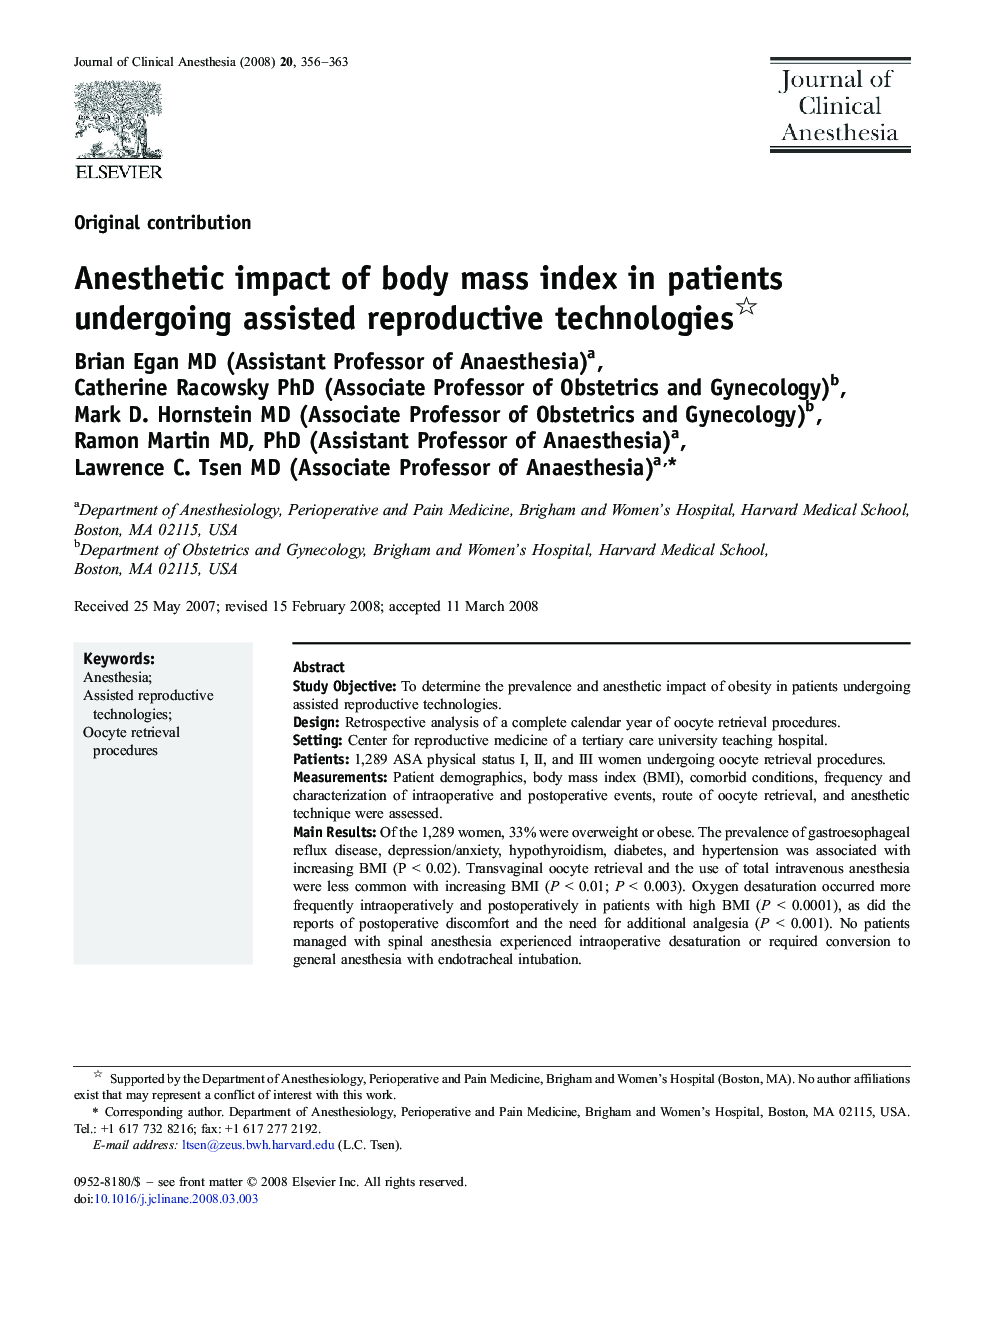 Anesthetic impact of body mass index in patients undergoing assisted reproductive technologies 